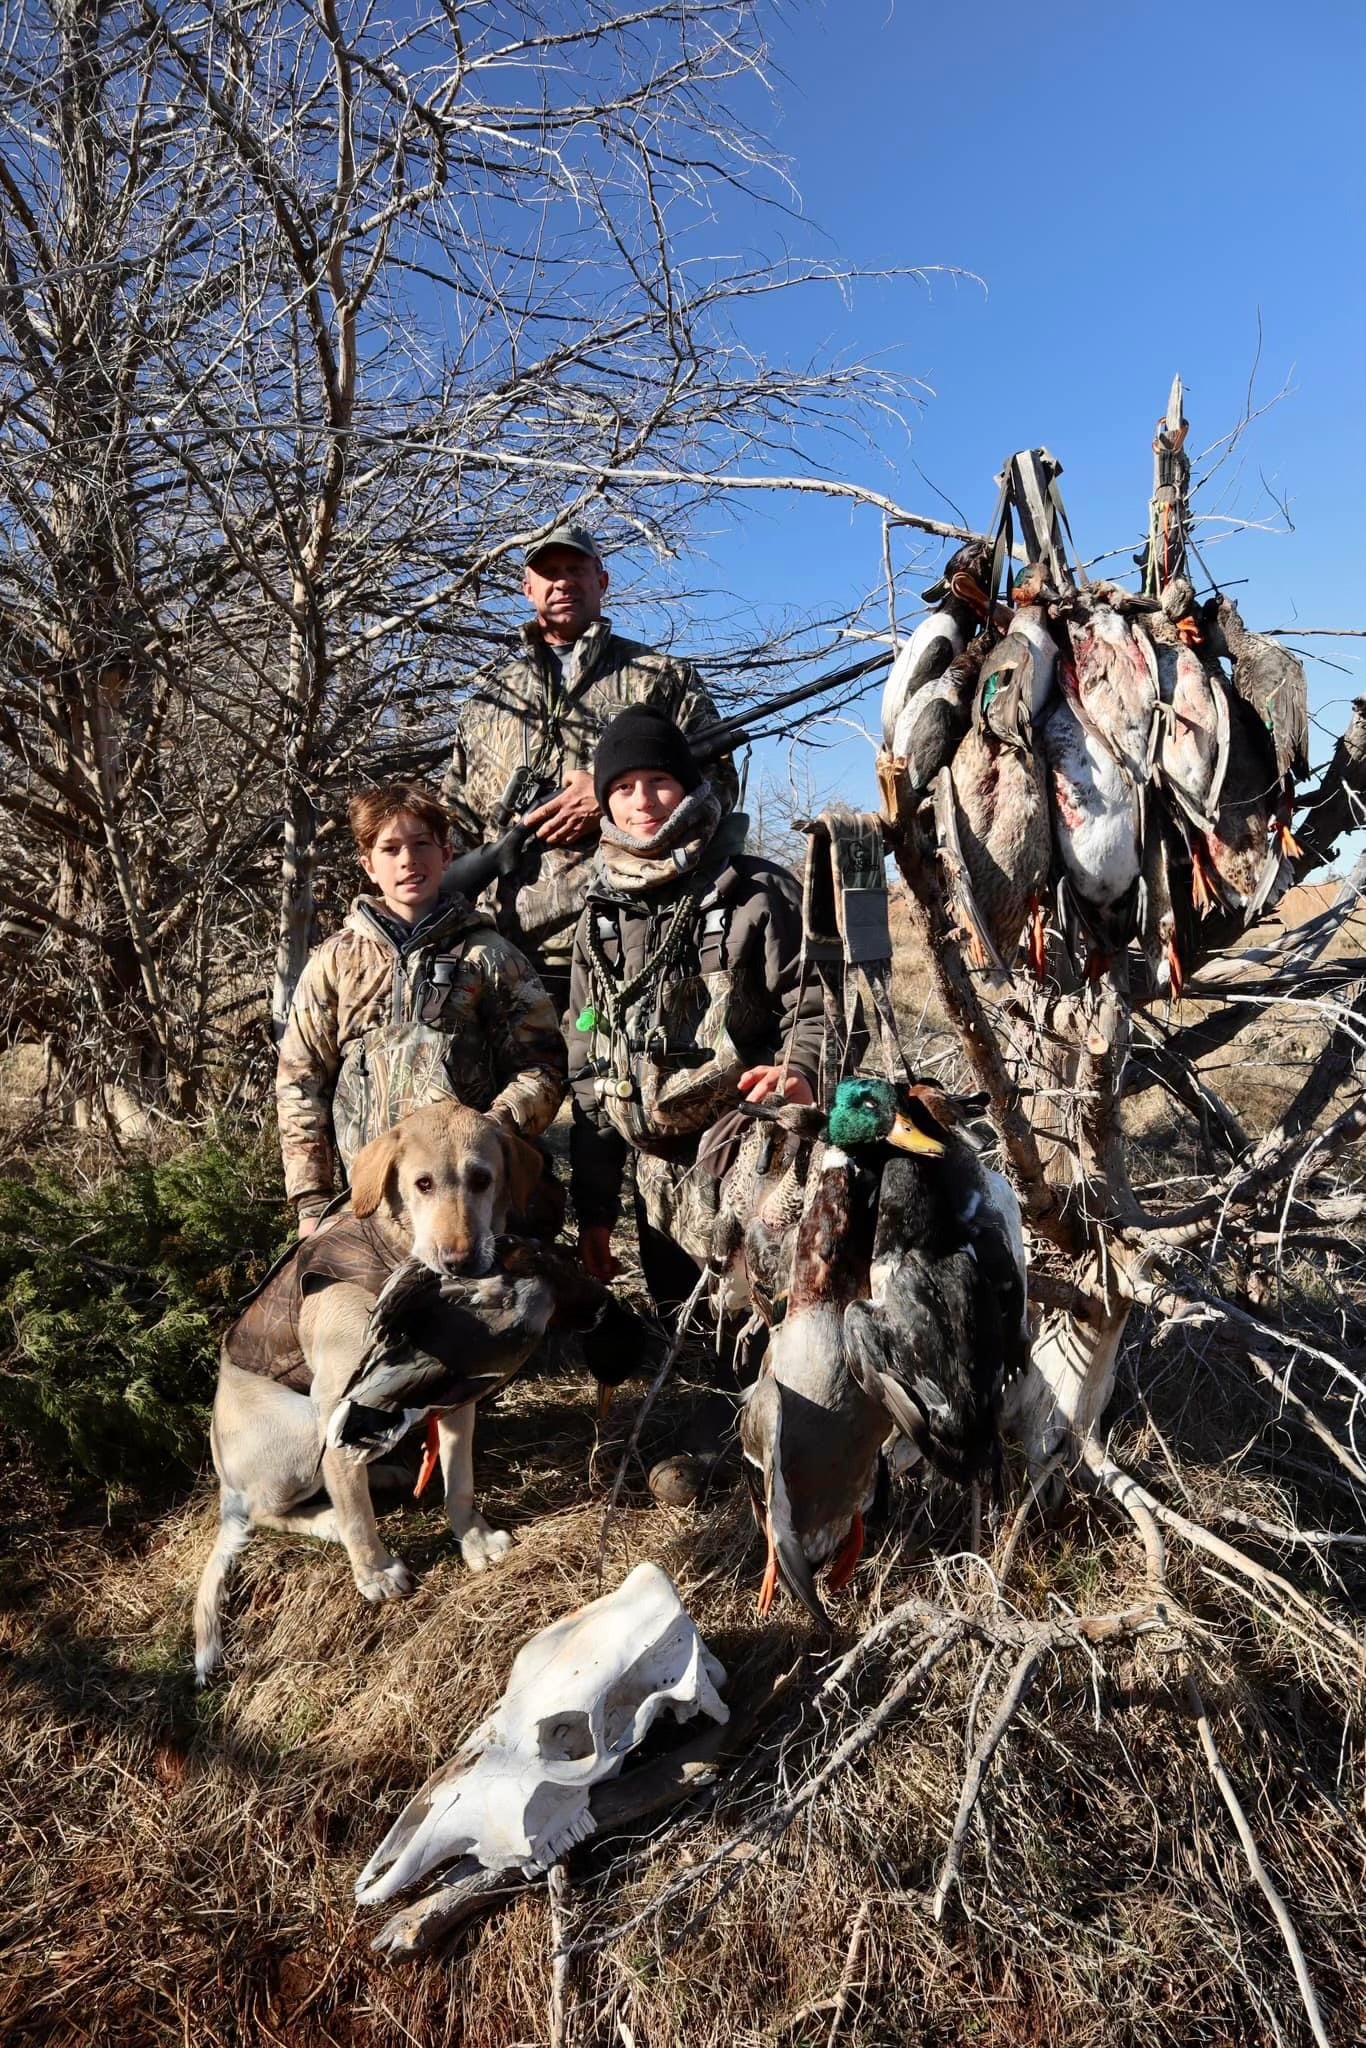 3 day 4 night KS and or Ok waterfowl Early Bird Booking normally $2000 but 20% off today making it only $1600!